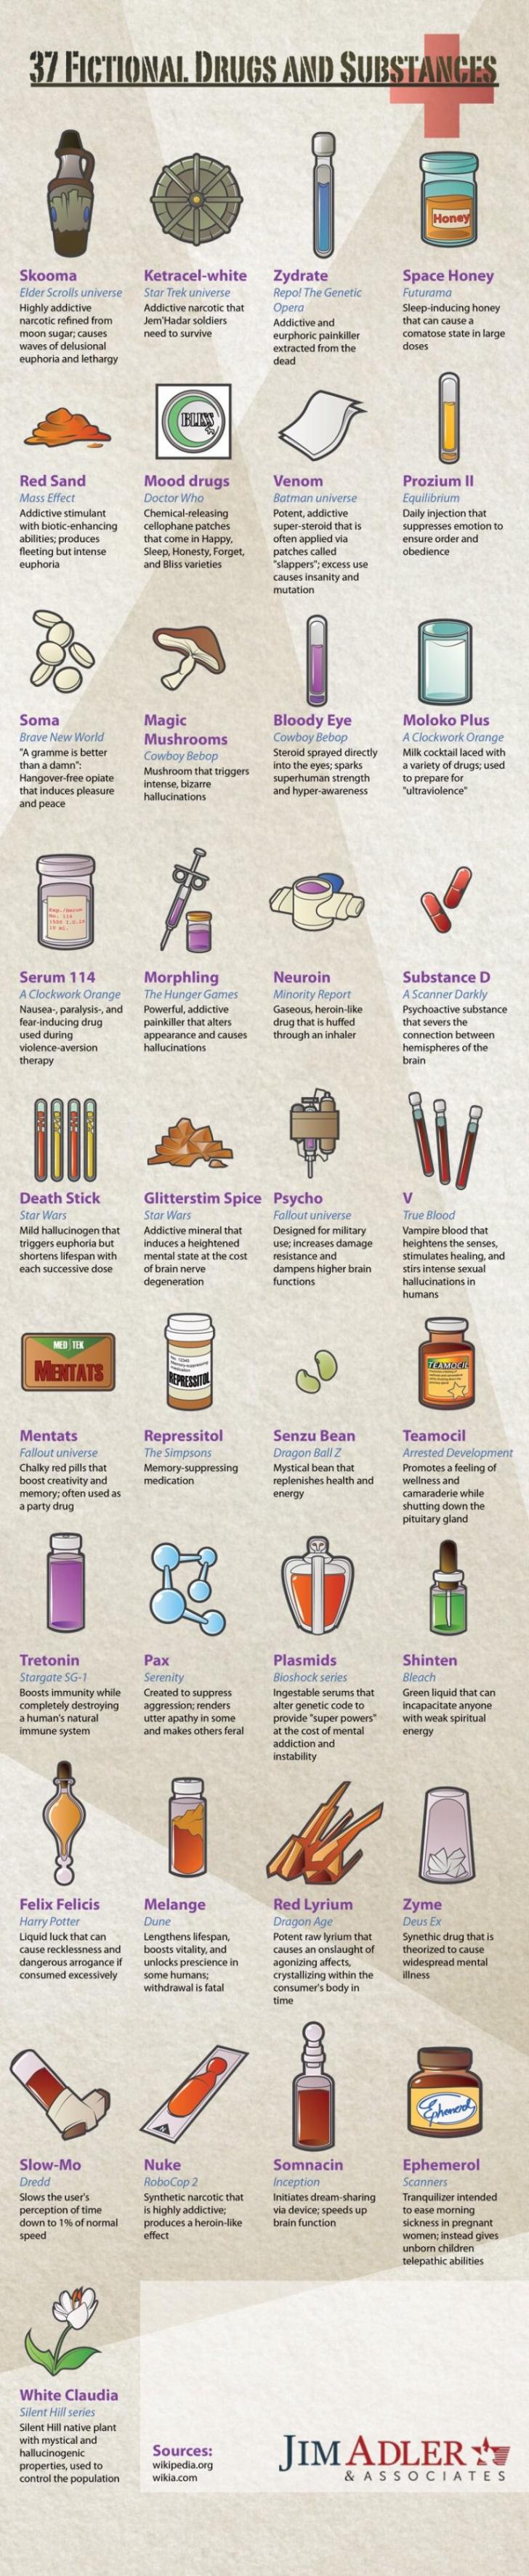 36 Fictional Drugs and Substances